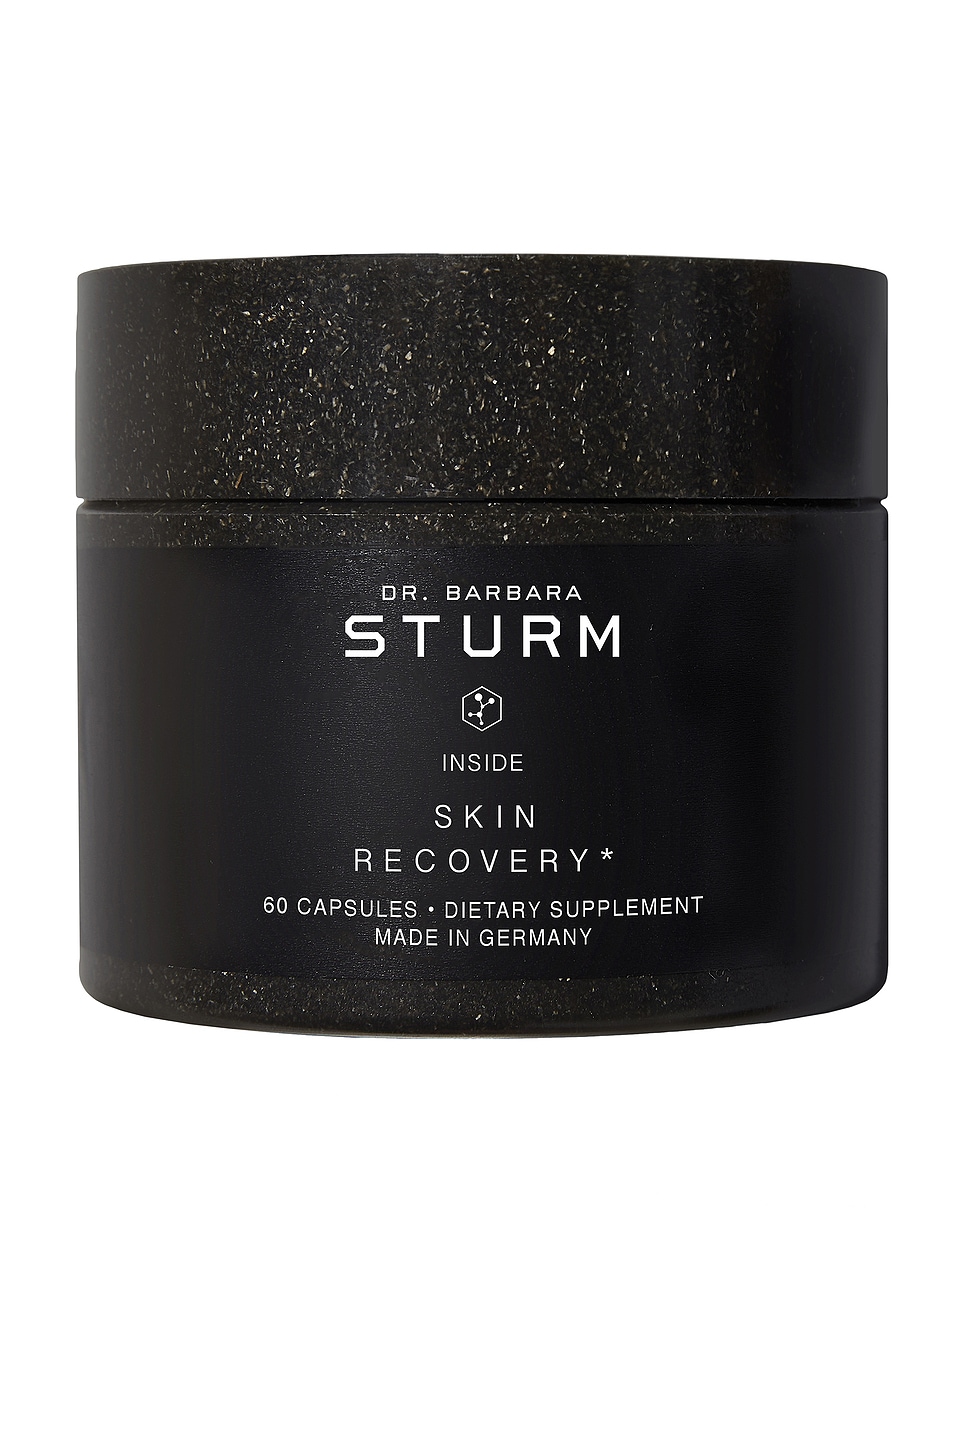 Skin Recovery Supplements in Beauty: NA